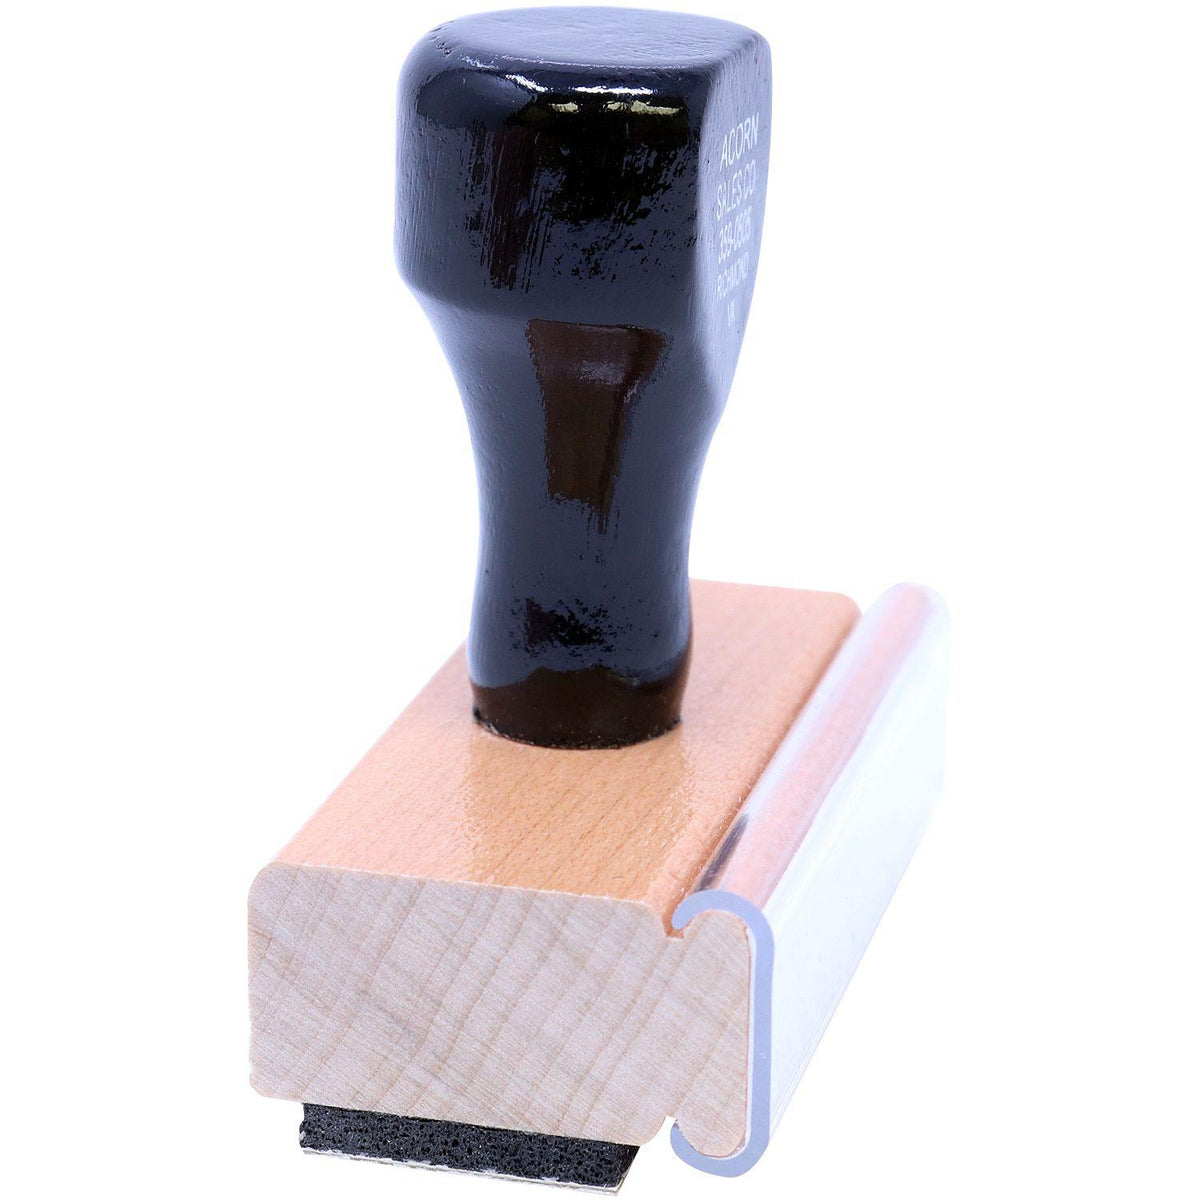 Side View of Large Outline Sample Rubber Stamp at an Angle